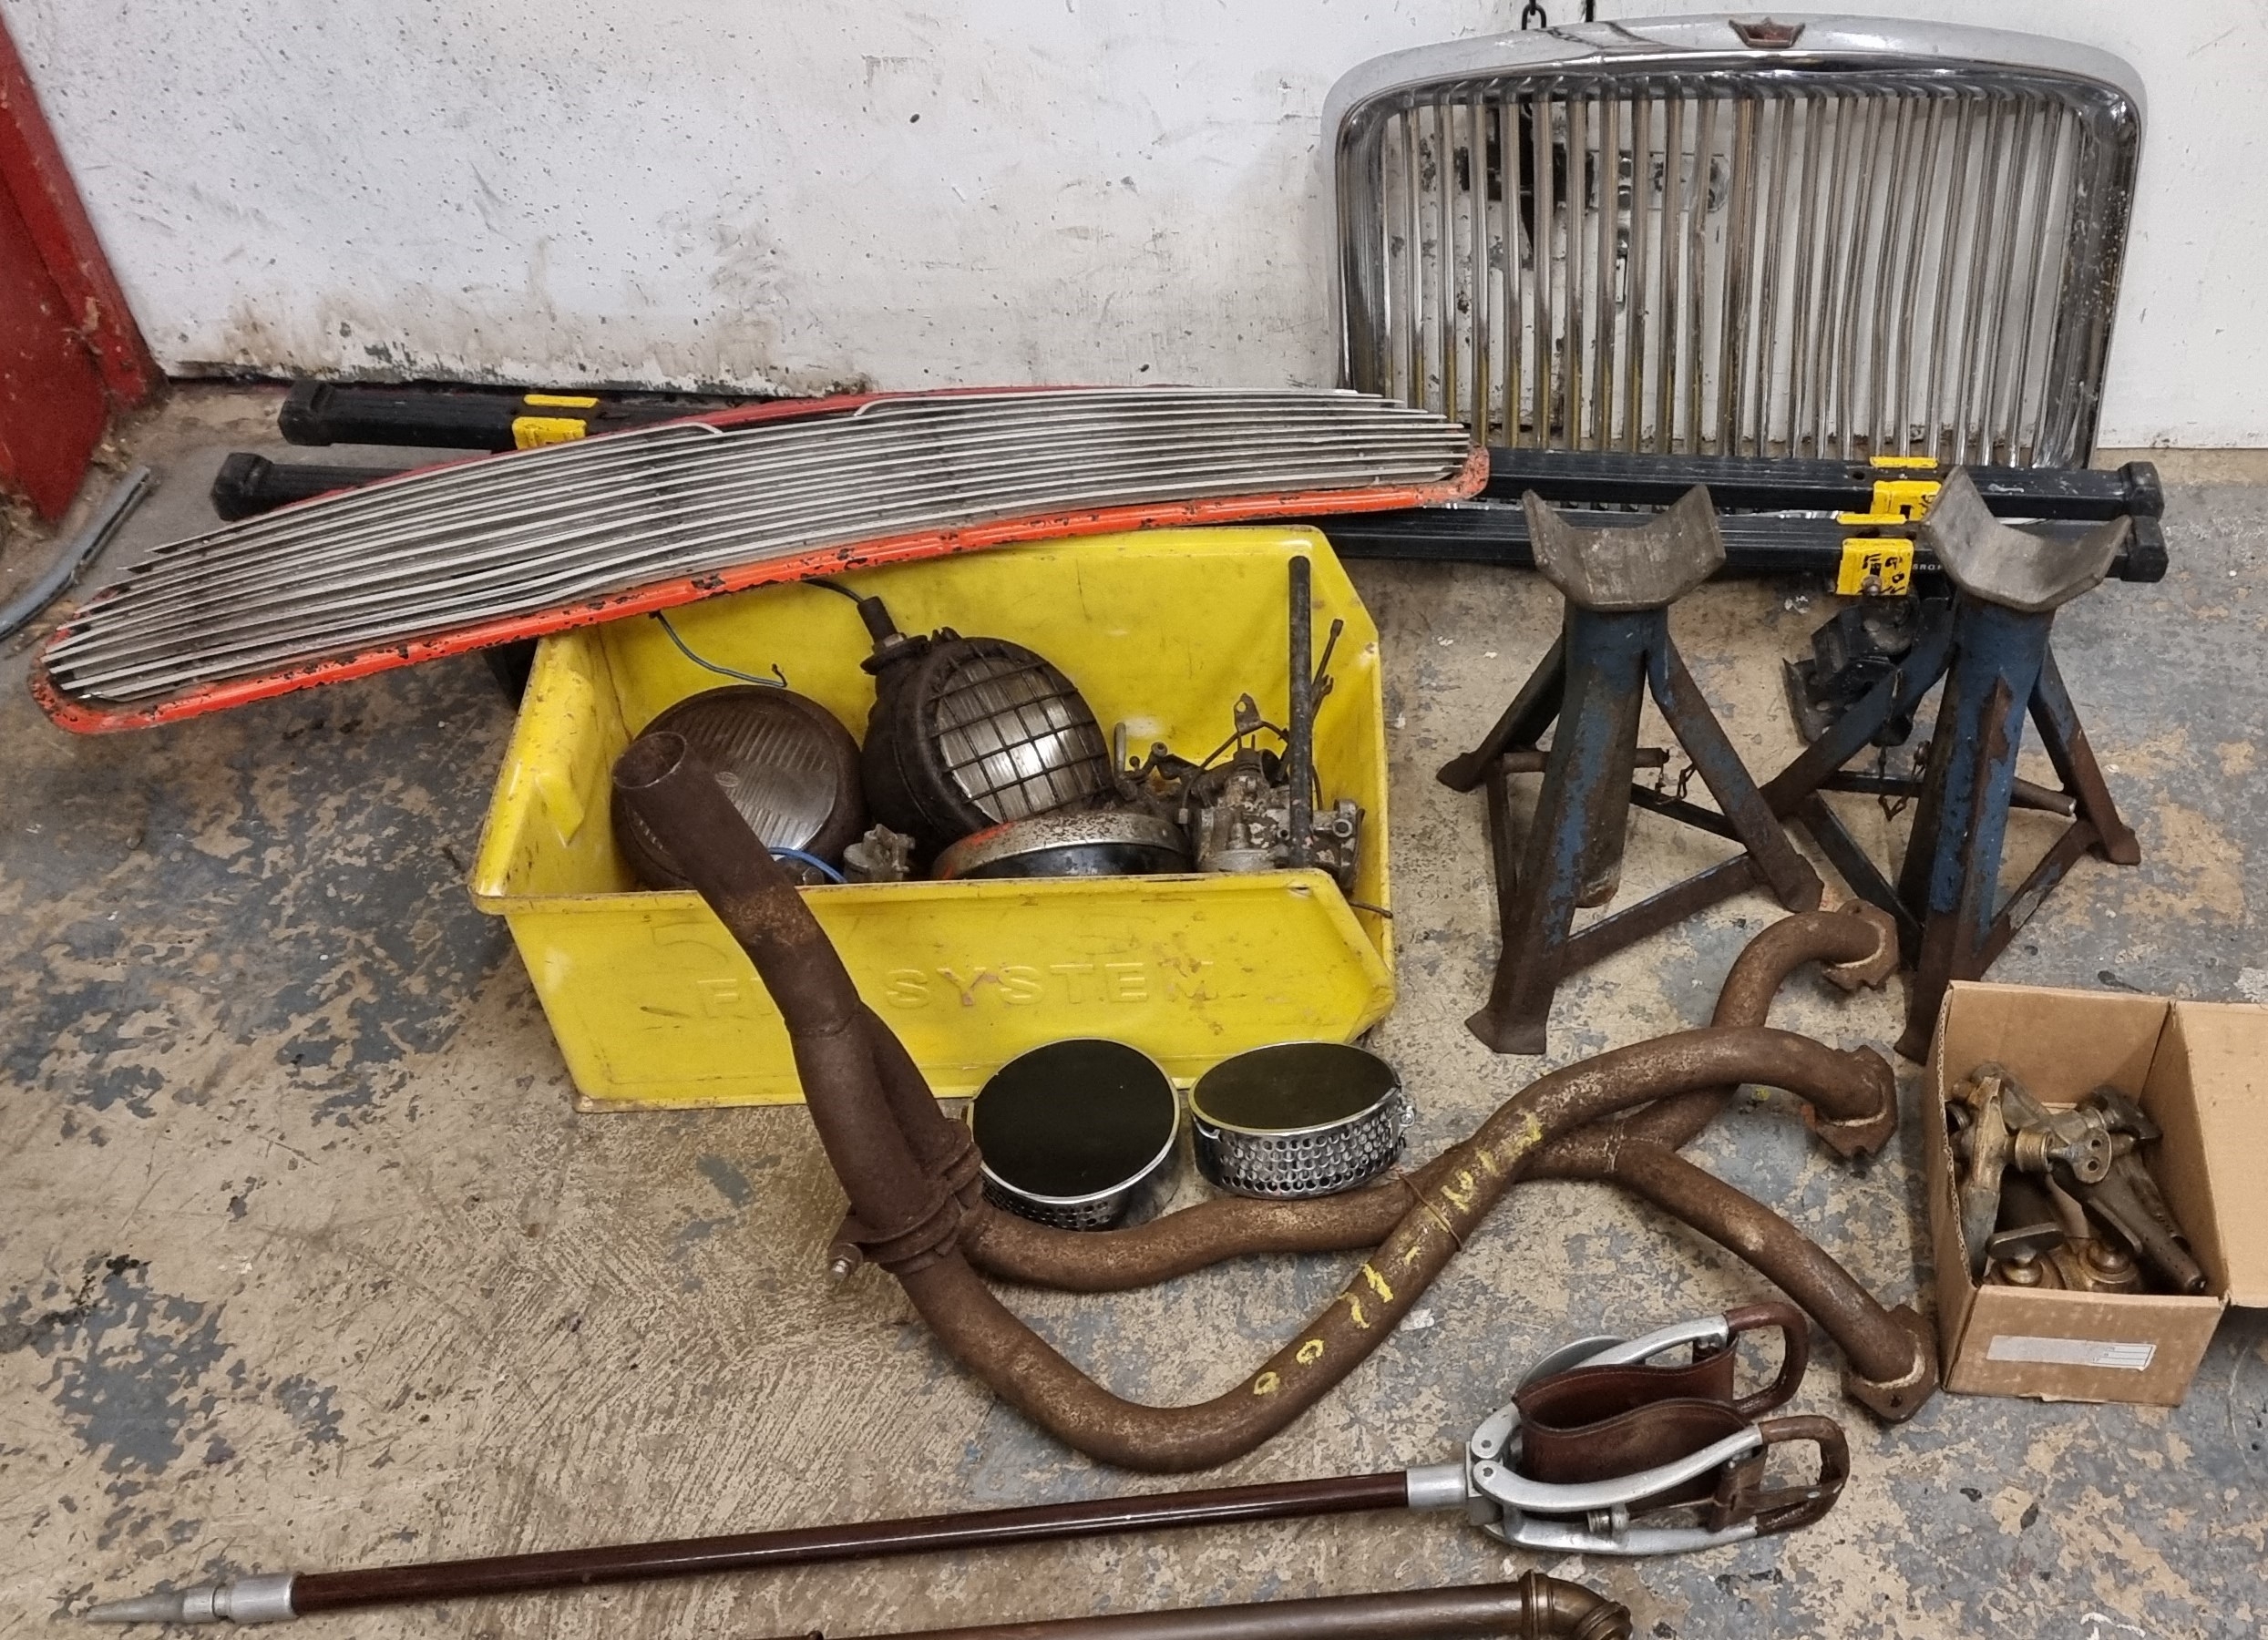 An auto jumblers lots, to include a BMC 1100/1300 Vanden Plas, a Mini down pipe, various lamps and